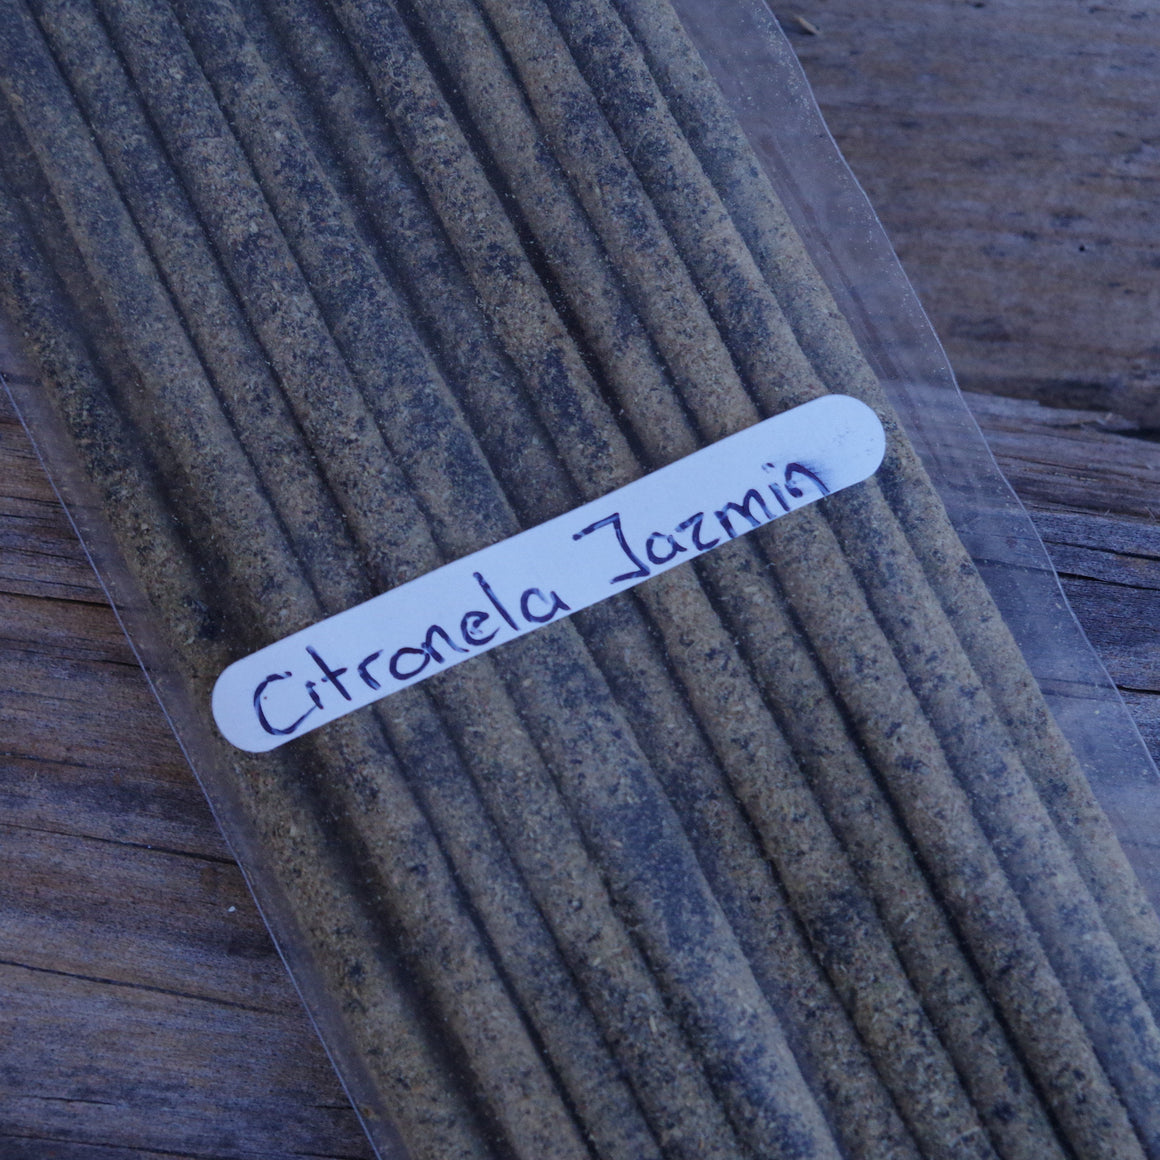 Citronella Jasmin Incense Sticks Handrolled In Mexico Long Duration 1.5 hours